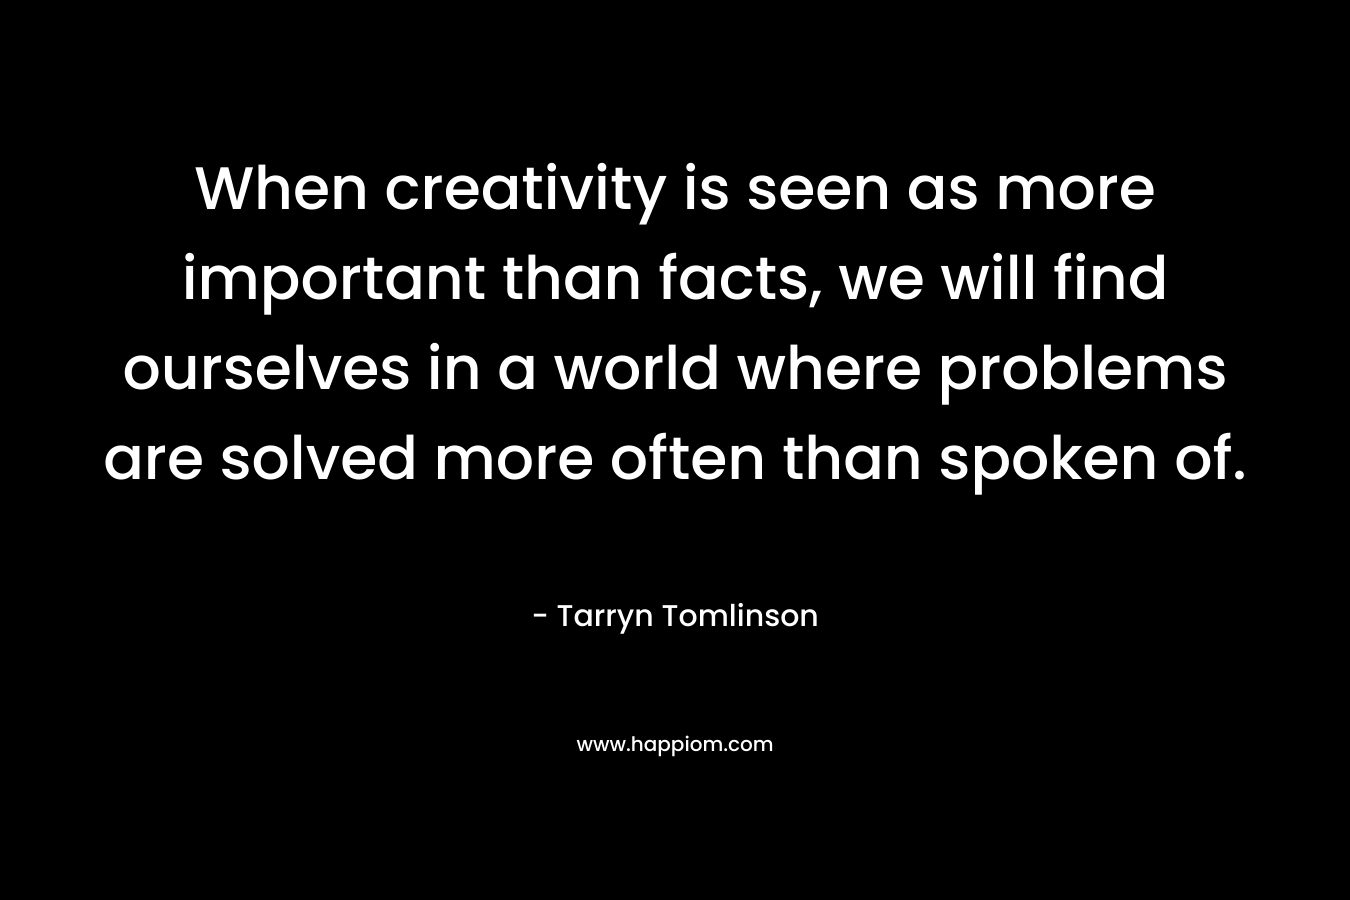 When creativity is seen as more important than facts, we will find ourselves in a world where problems are solved more often than spoken of.